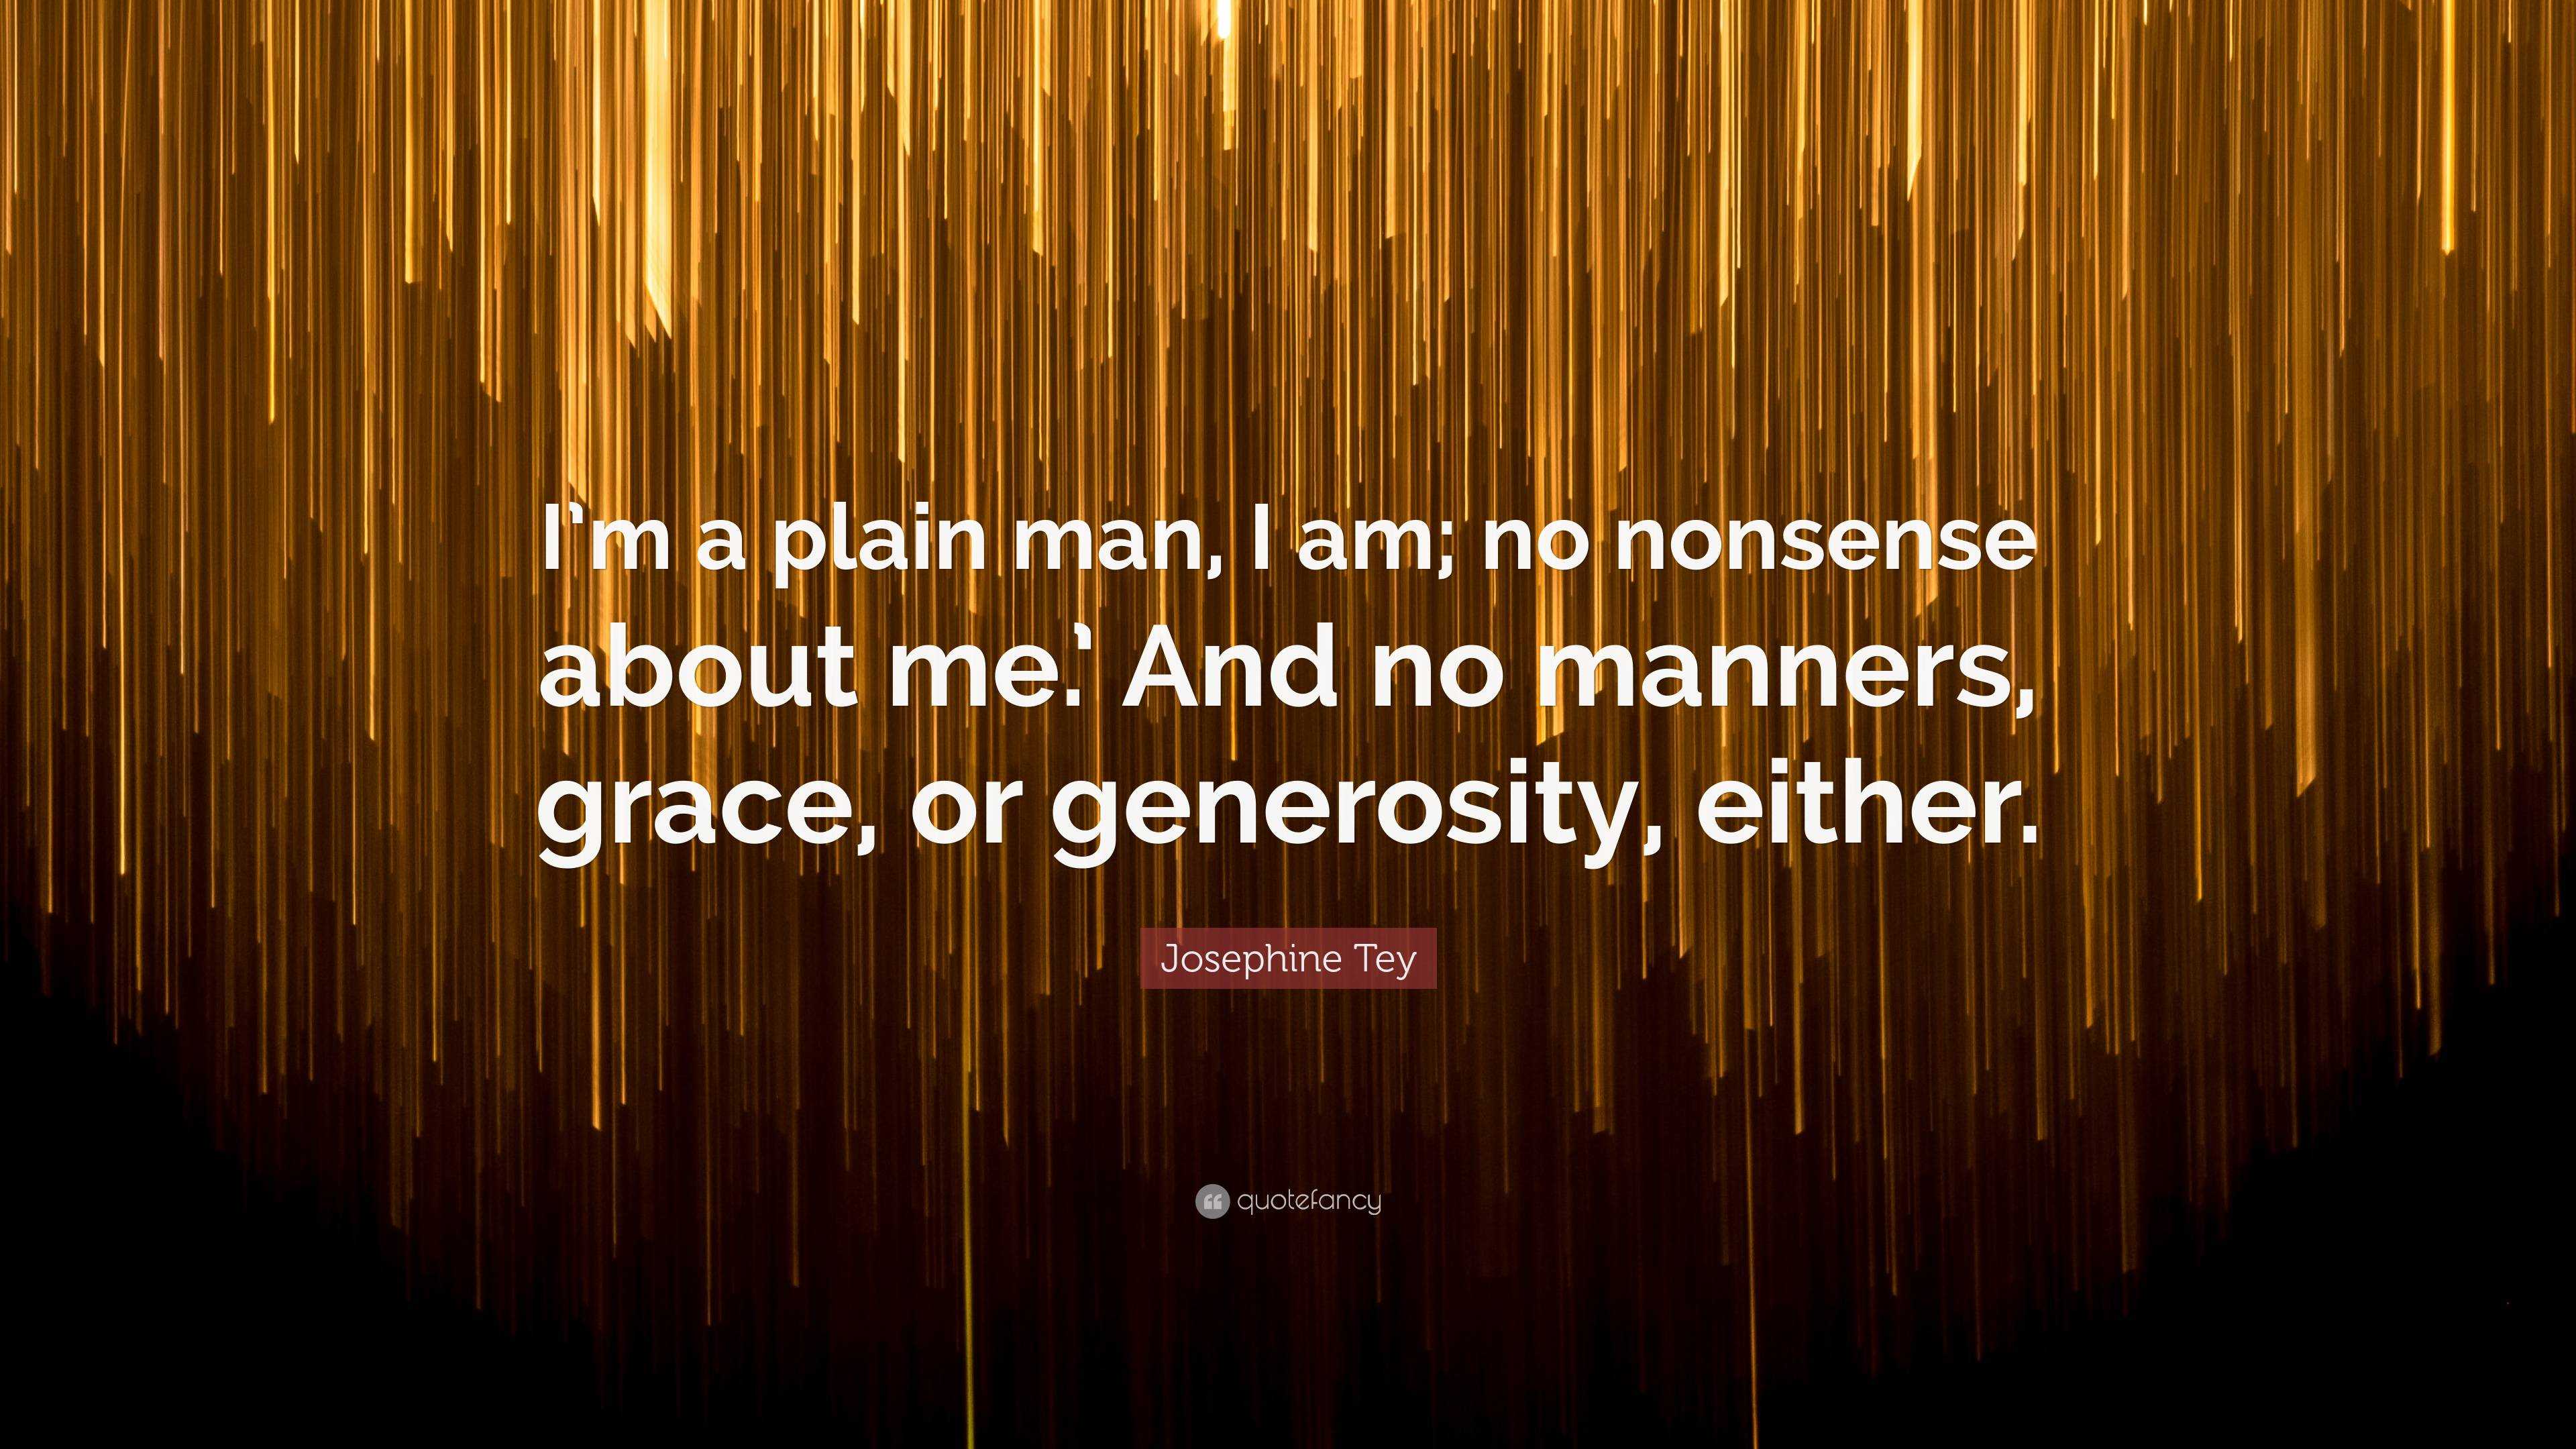 https://quotefancy.com/media/wallpaper/3840x2160/7058475-Josephine-Tey-Quote-I-m-a-plain-man-I-am-no-nonsense-about-me-And.jpg